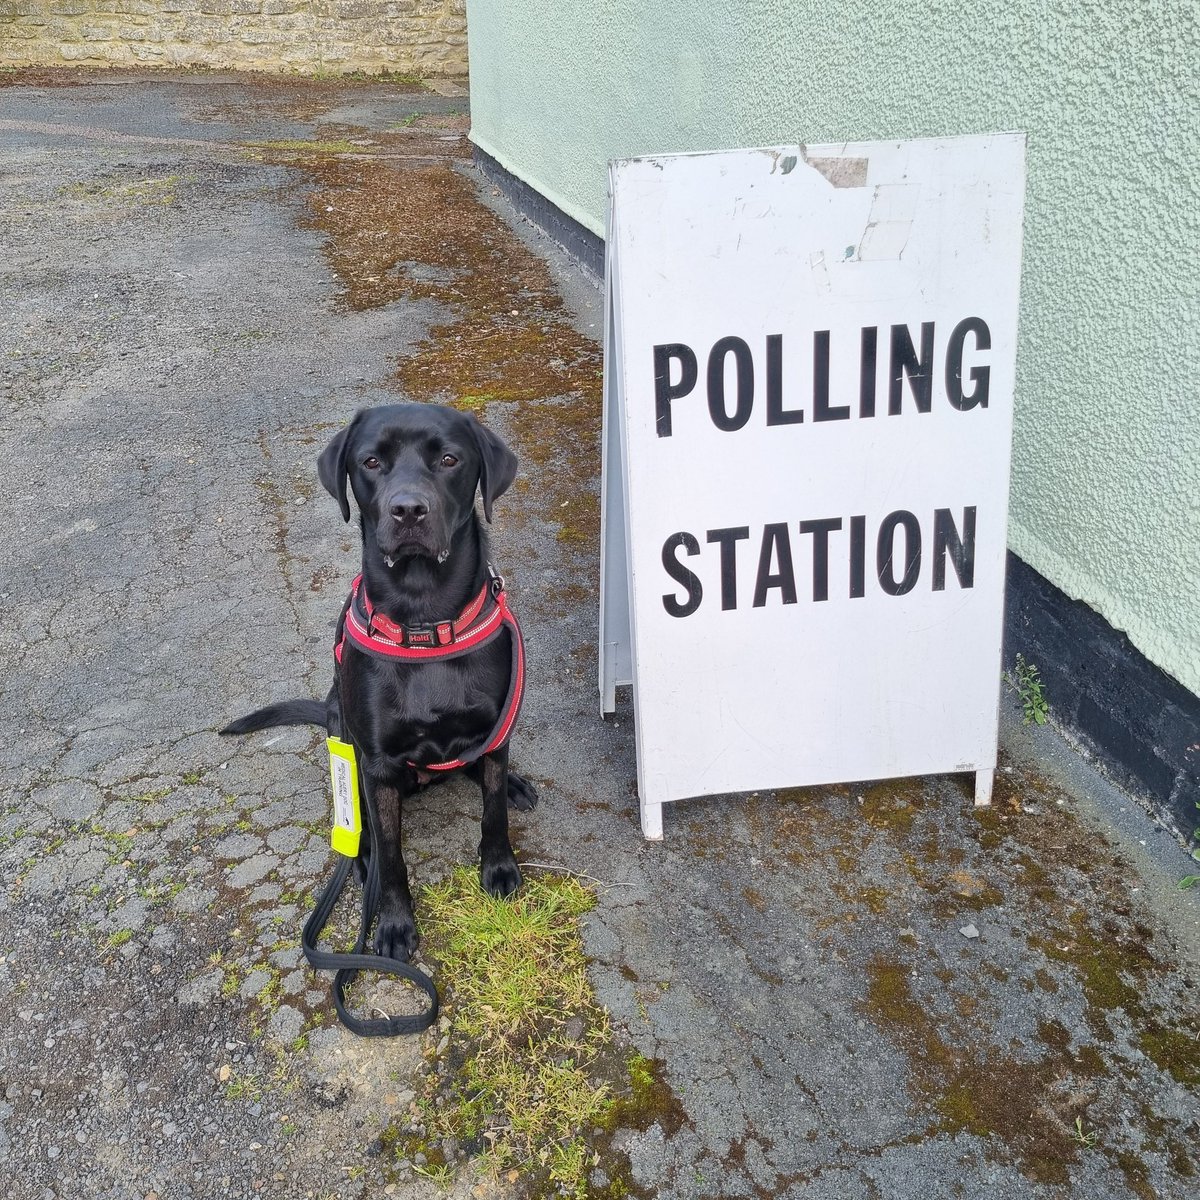 Medical Alert Assistance Dog in training, Winnie, helped her Socialiser at the pawling station #vote